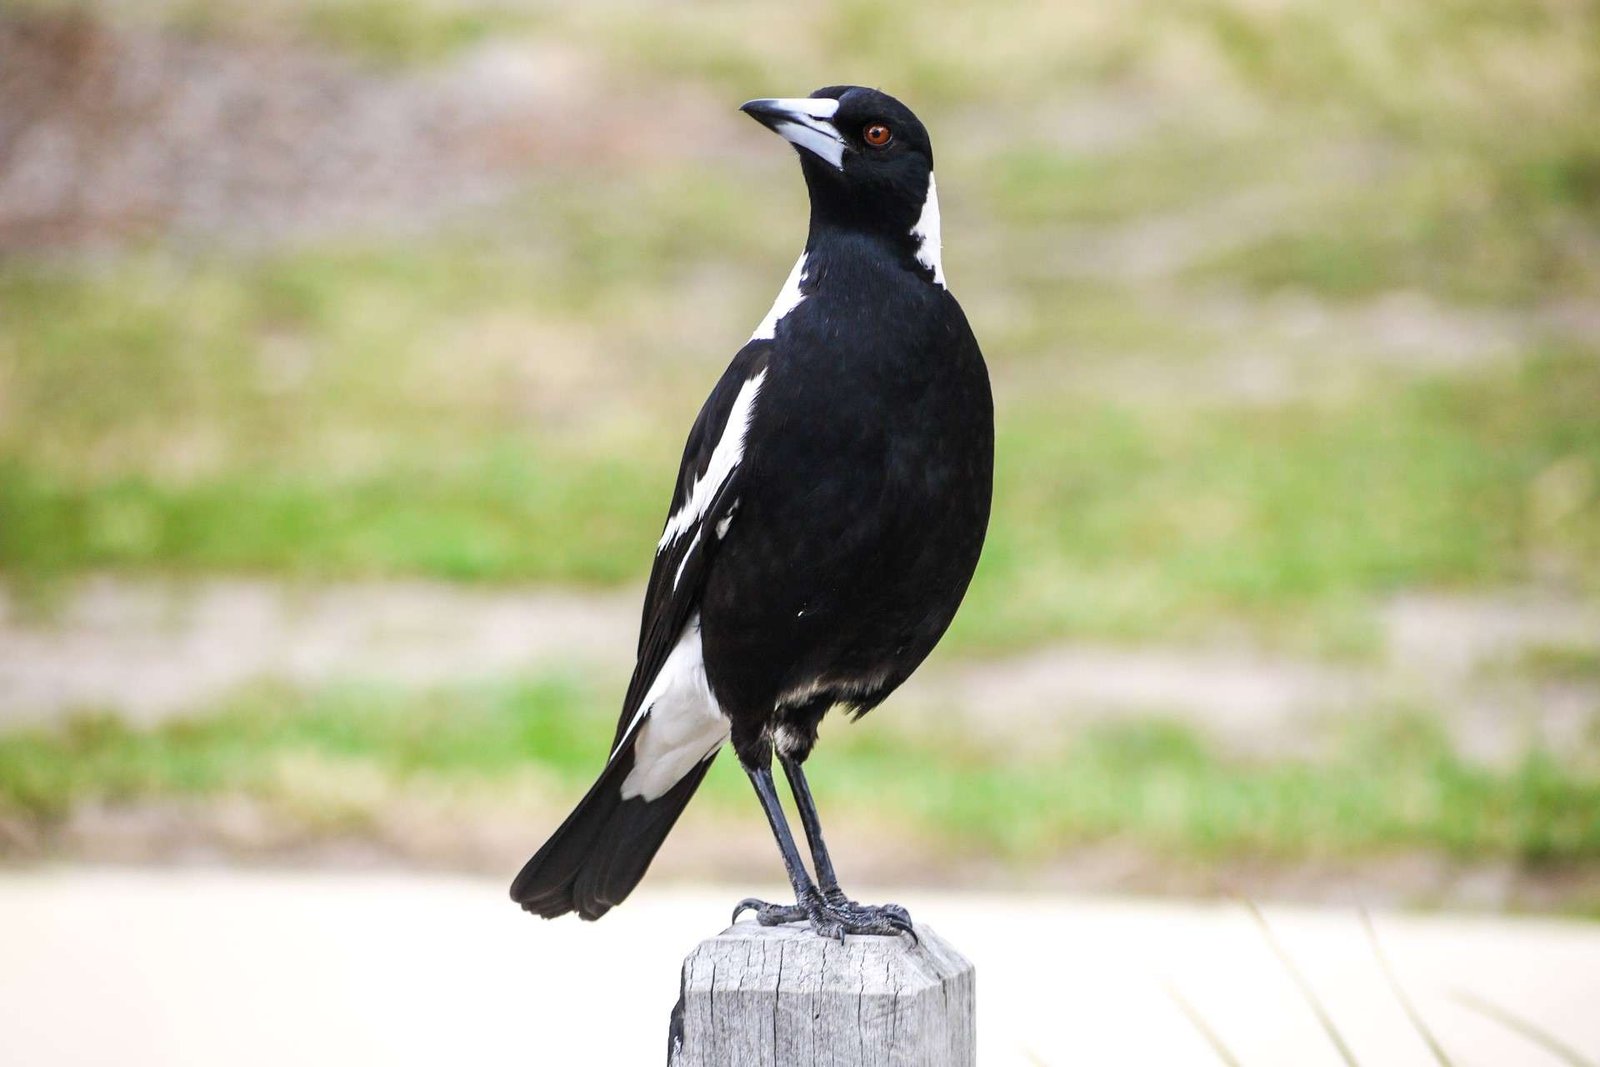 An Australian magpie perched on a wooden post.